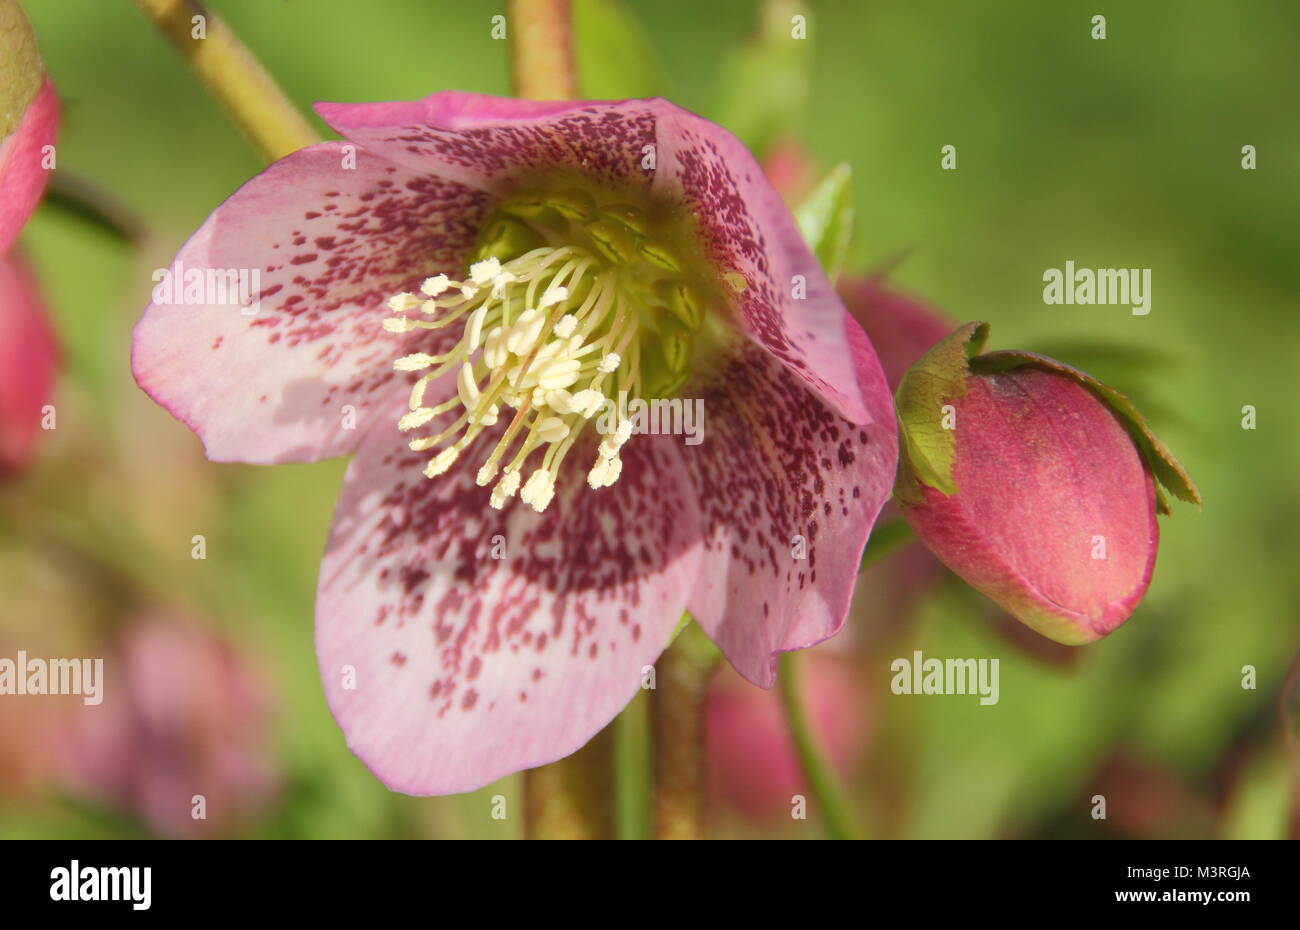 Helleborus x hydridus, a hybrid hellebore with speckl;ed petals, in flower in a an English garden in early February, UK Stock Photo